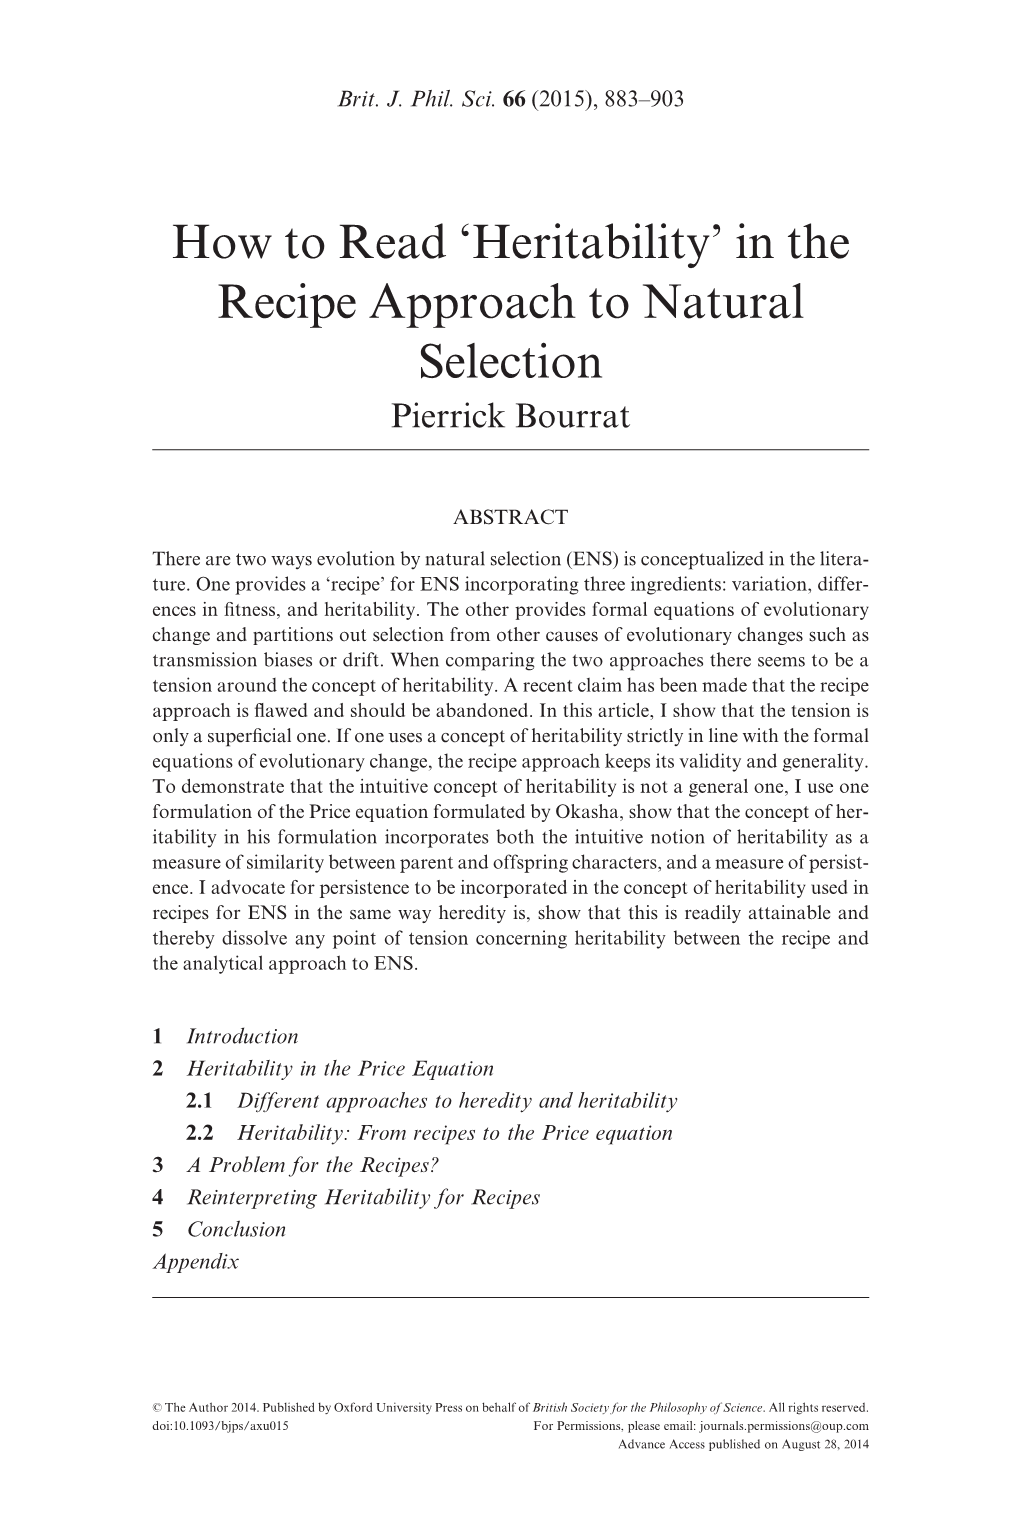 How to Read 'Heritability' in the Recipe Approach to Natural Selection